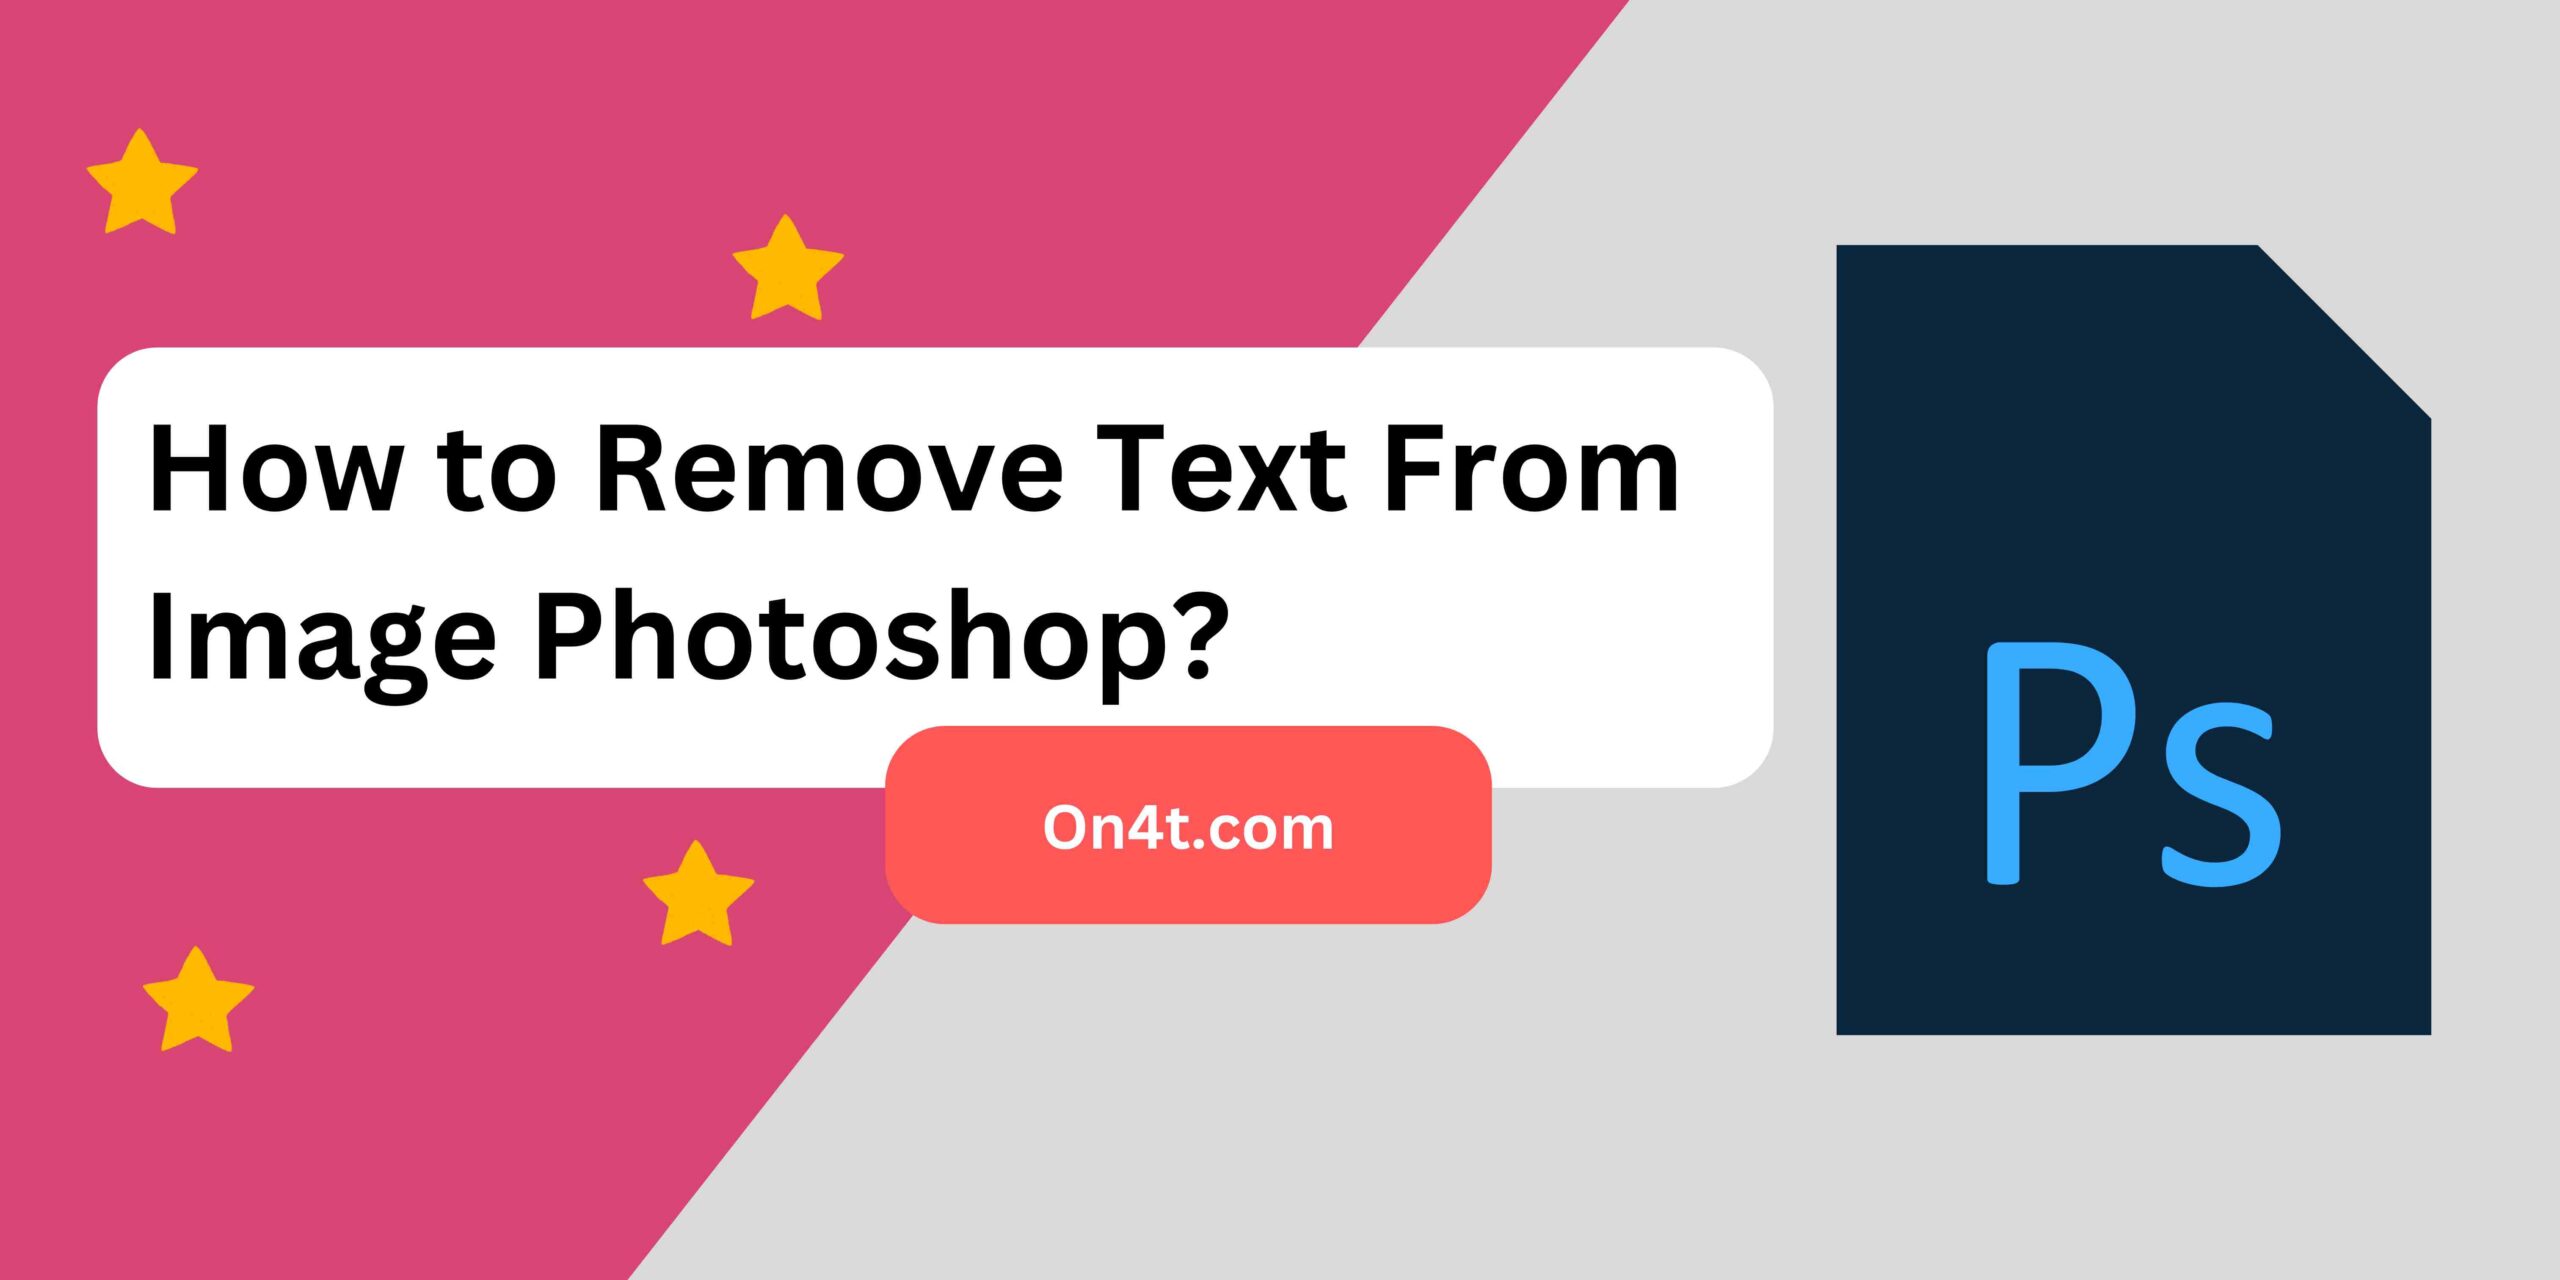 How to Remove Text From Image Photoshop